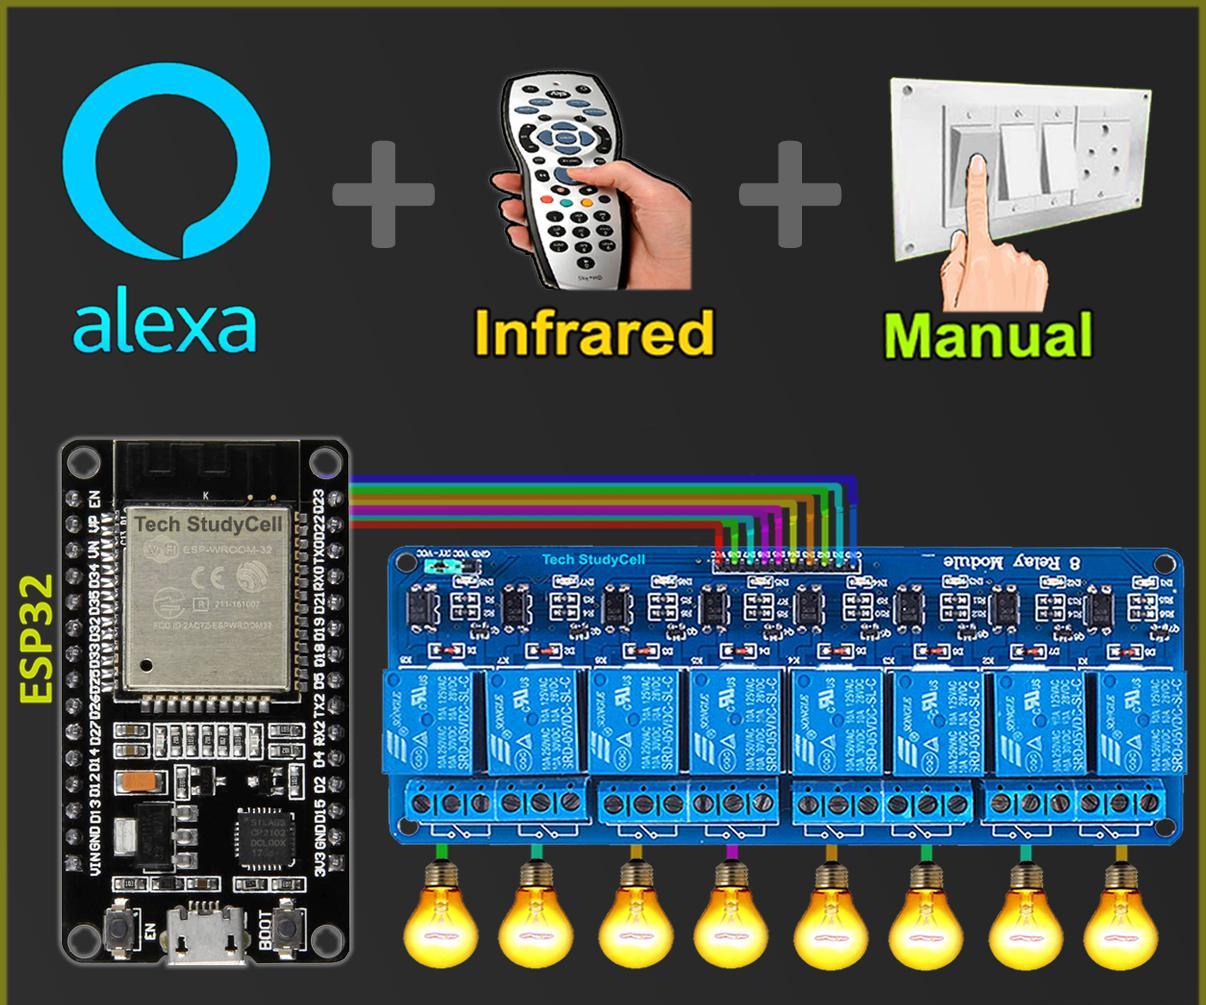 Alexa Home Automation Using ESP32 With IR Remote & Manual Control - IoT Projects 2021